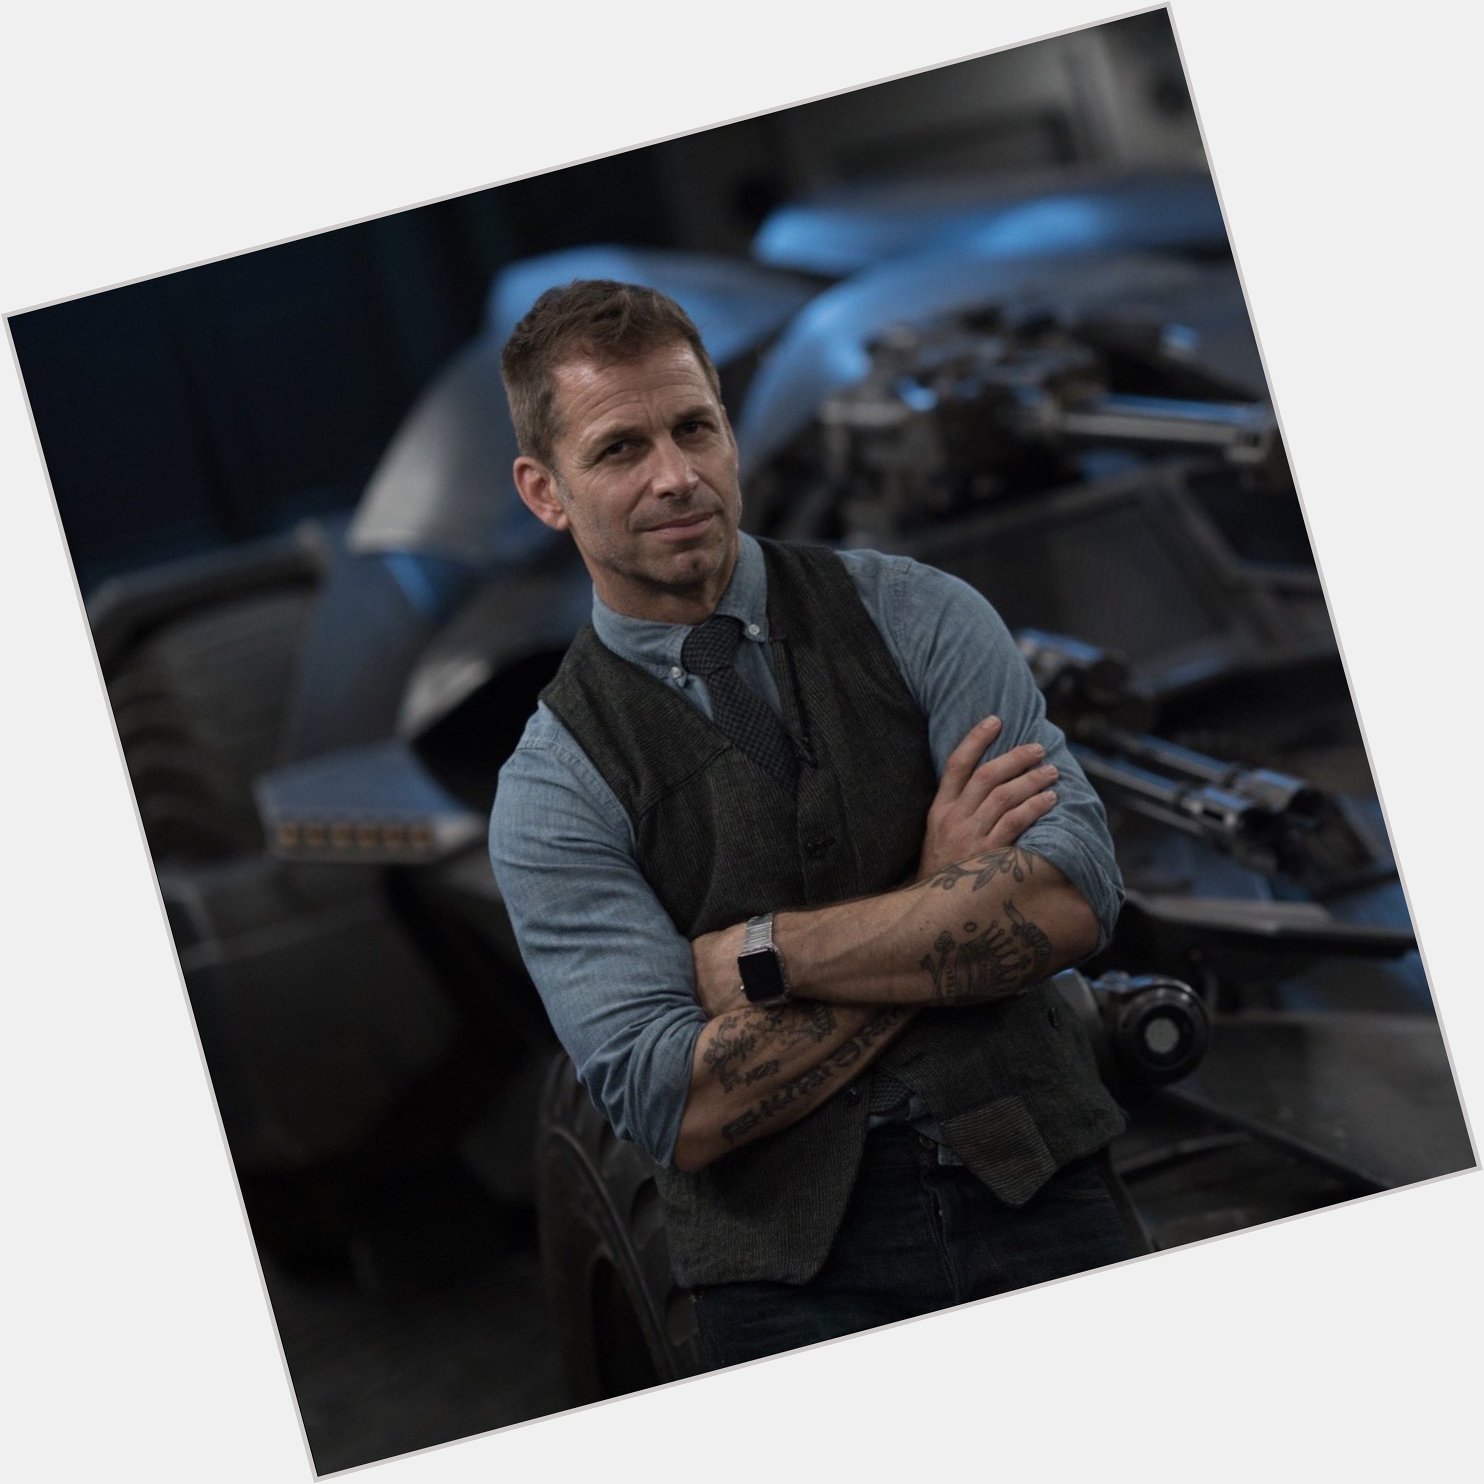 Happy 55th Birthday to Zack Snyder! 

Hell of month for this guy  